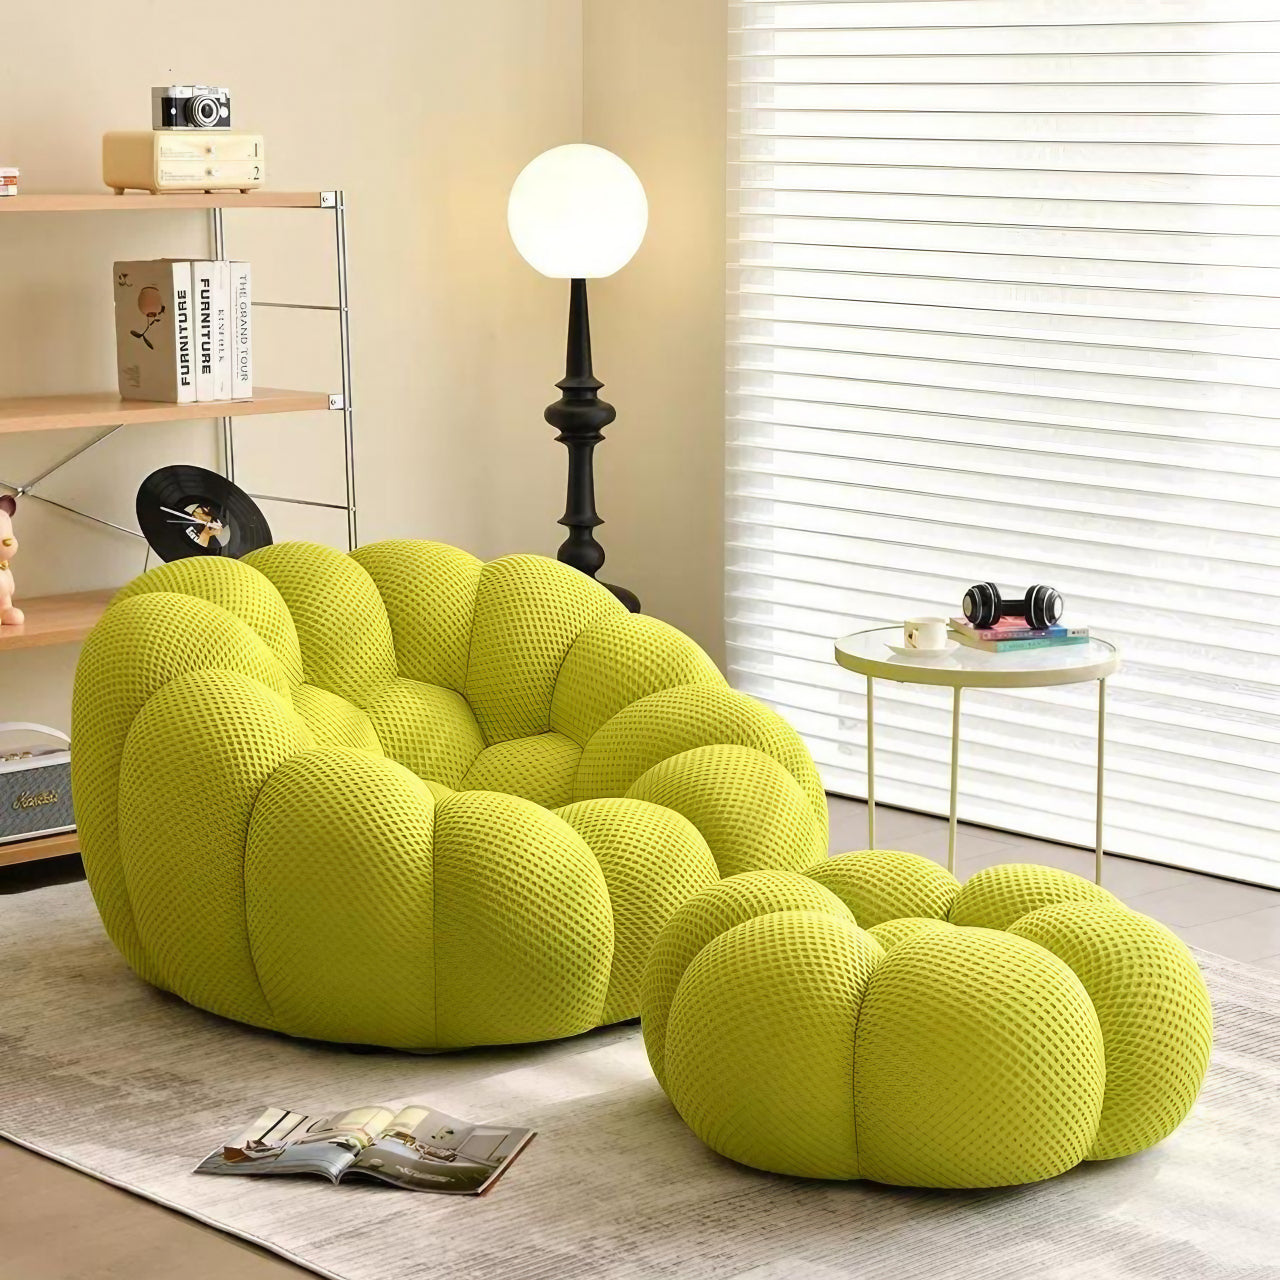 Green football-shaped lazy sofa single chair with 3D knit fabric in a modern living room setting